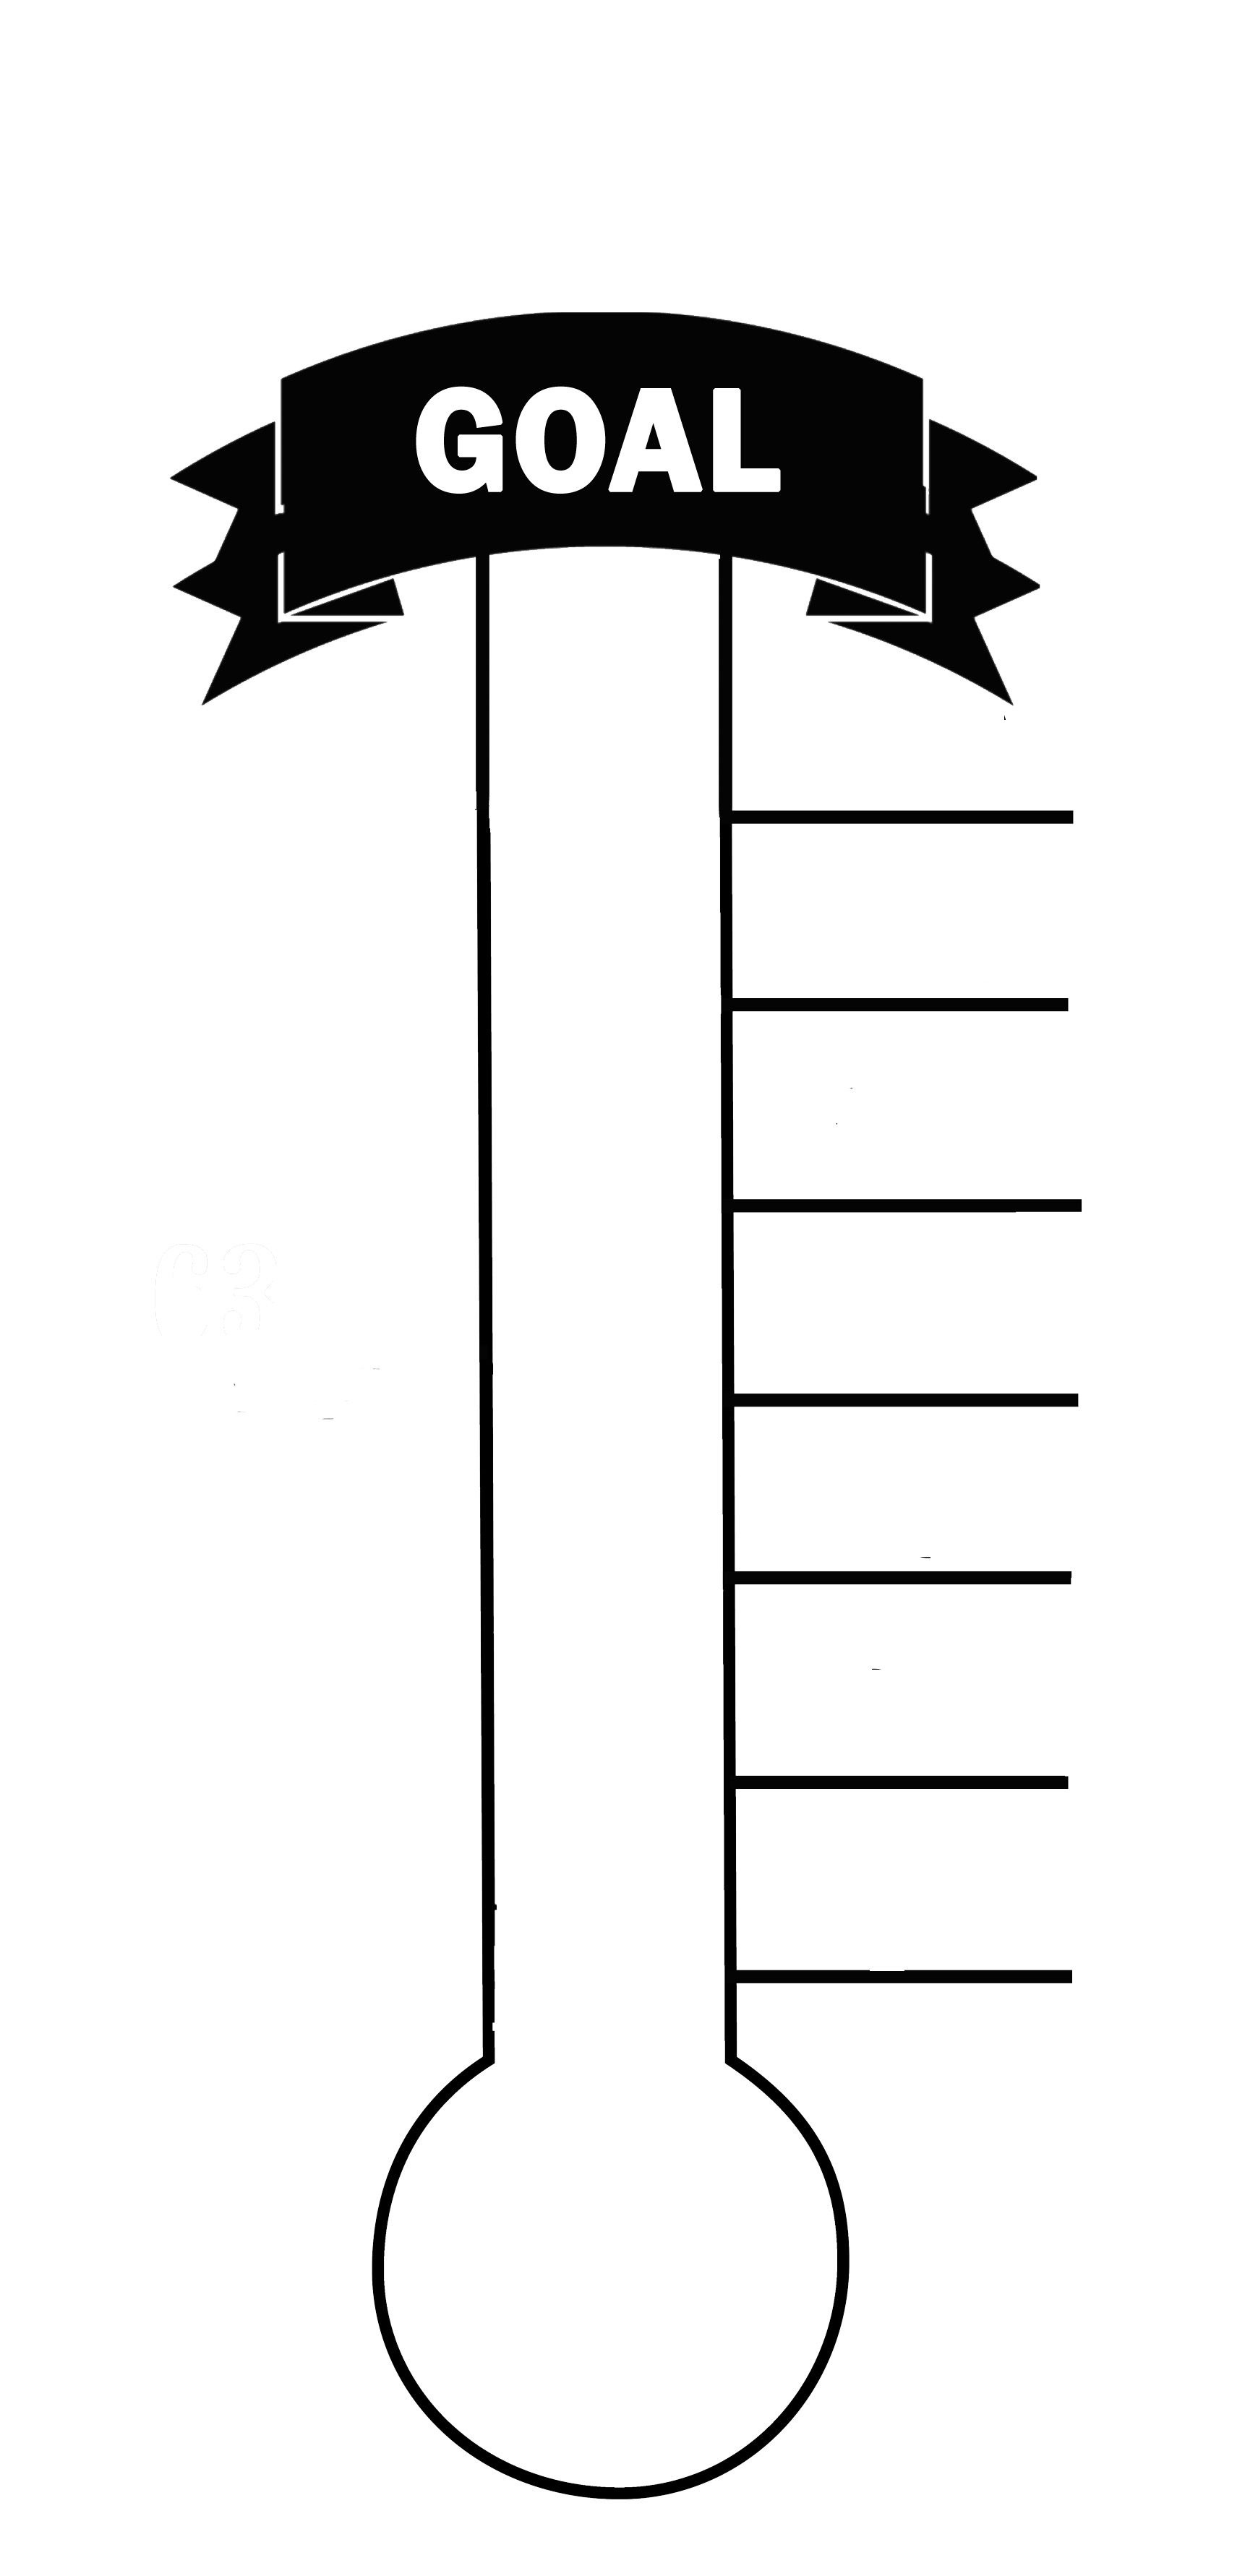 Here&amp;#039;s A Great Way To Encourage Your Church Or Small Group! Print - Free Printable Thermometer Goal Chart